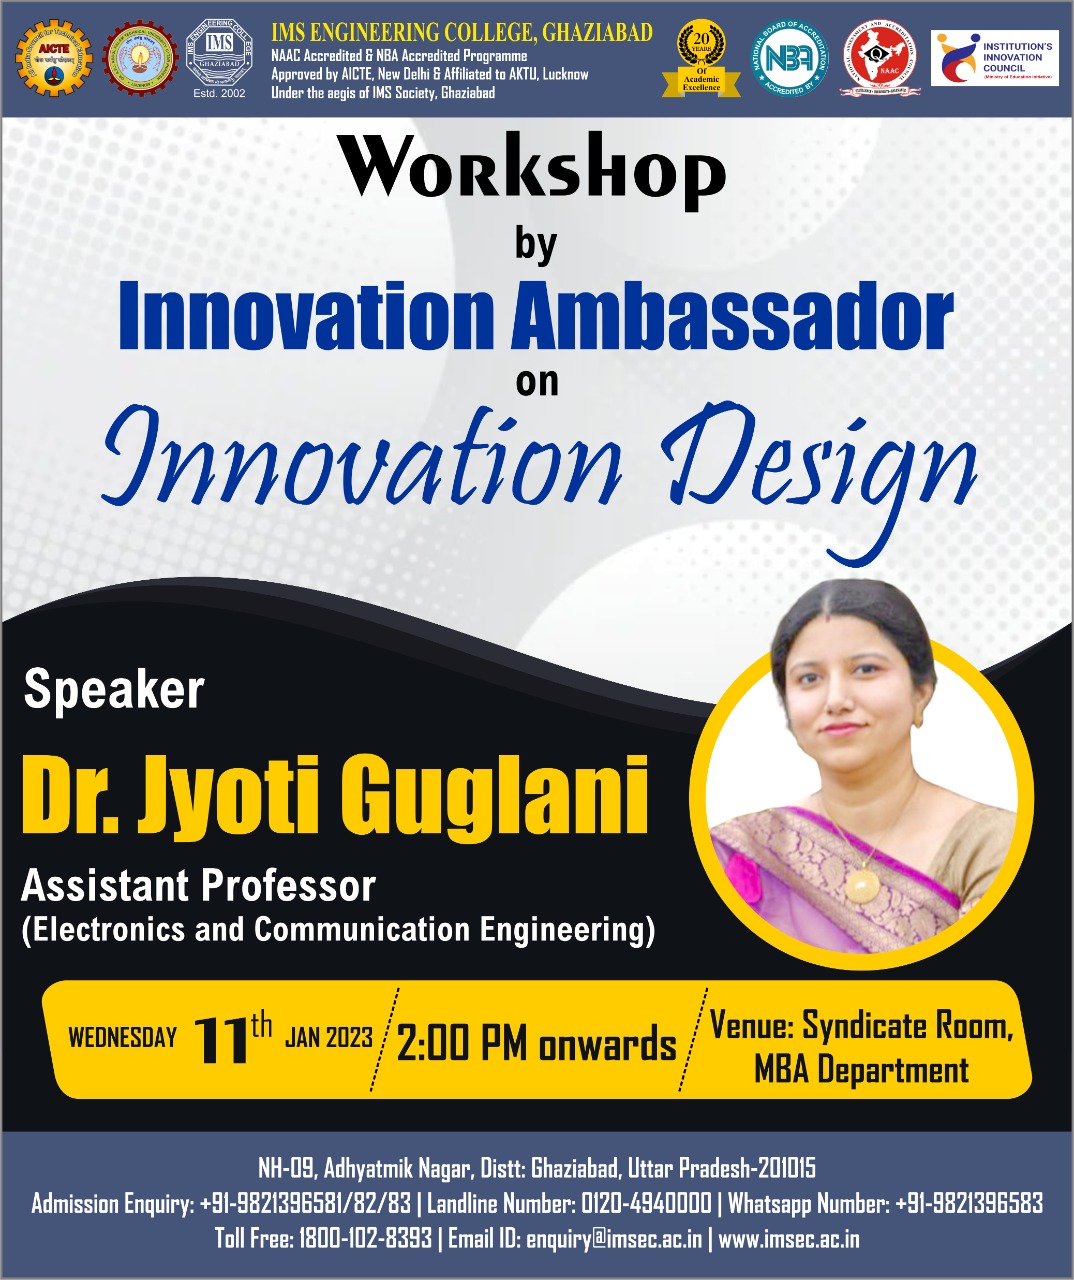 Workshop by Dr. Jyoti Guglani on the topic Innovation Design